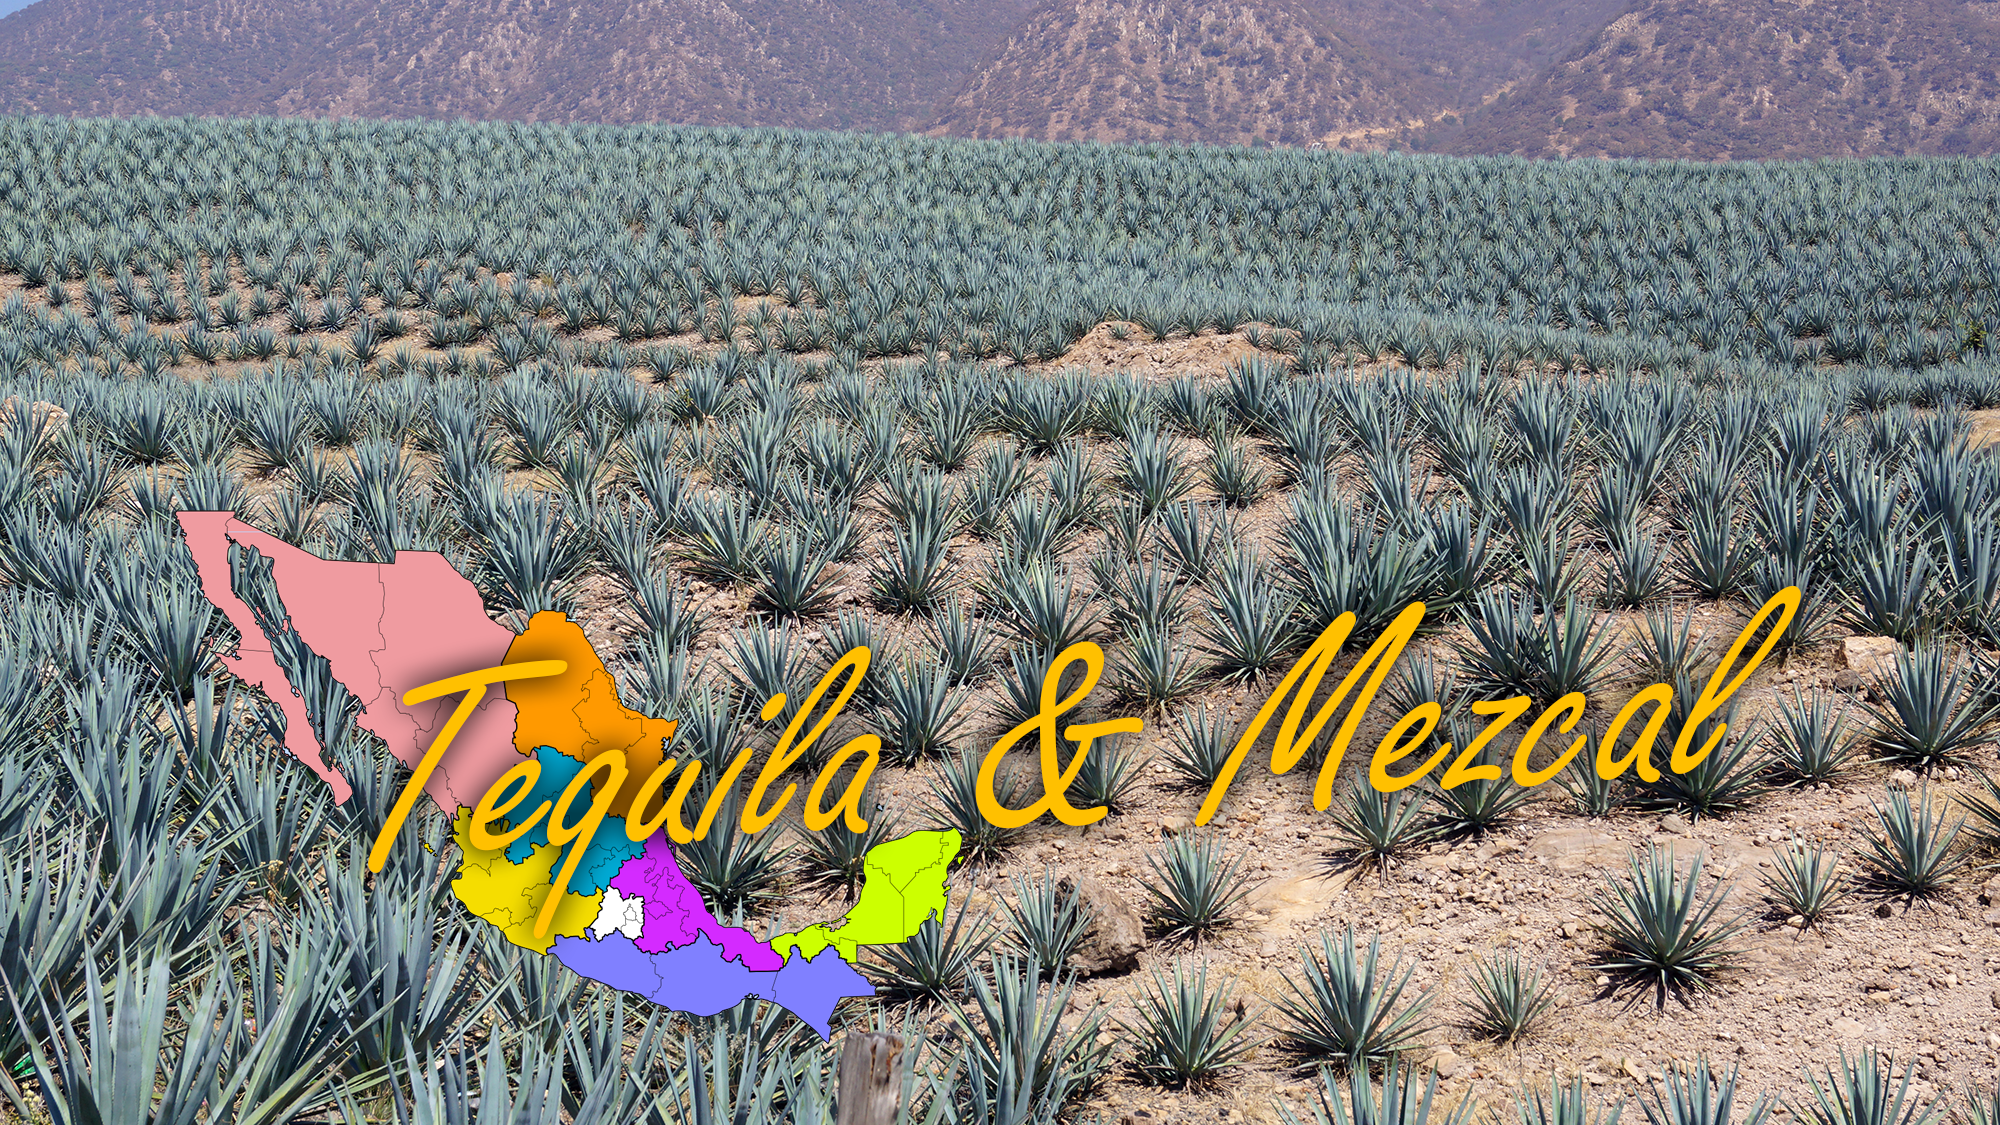 Tequila and Mezcal Night